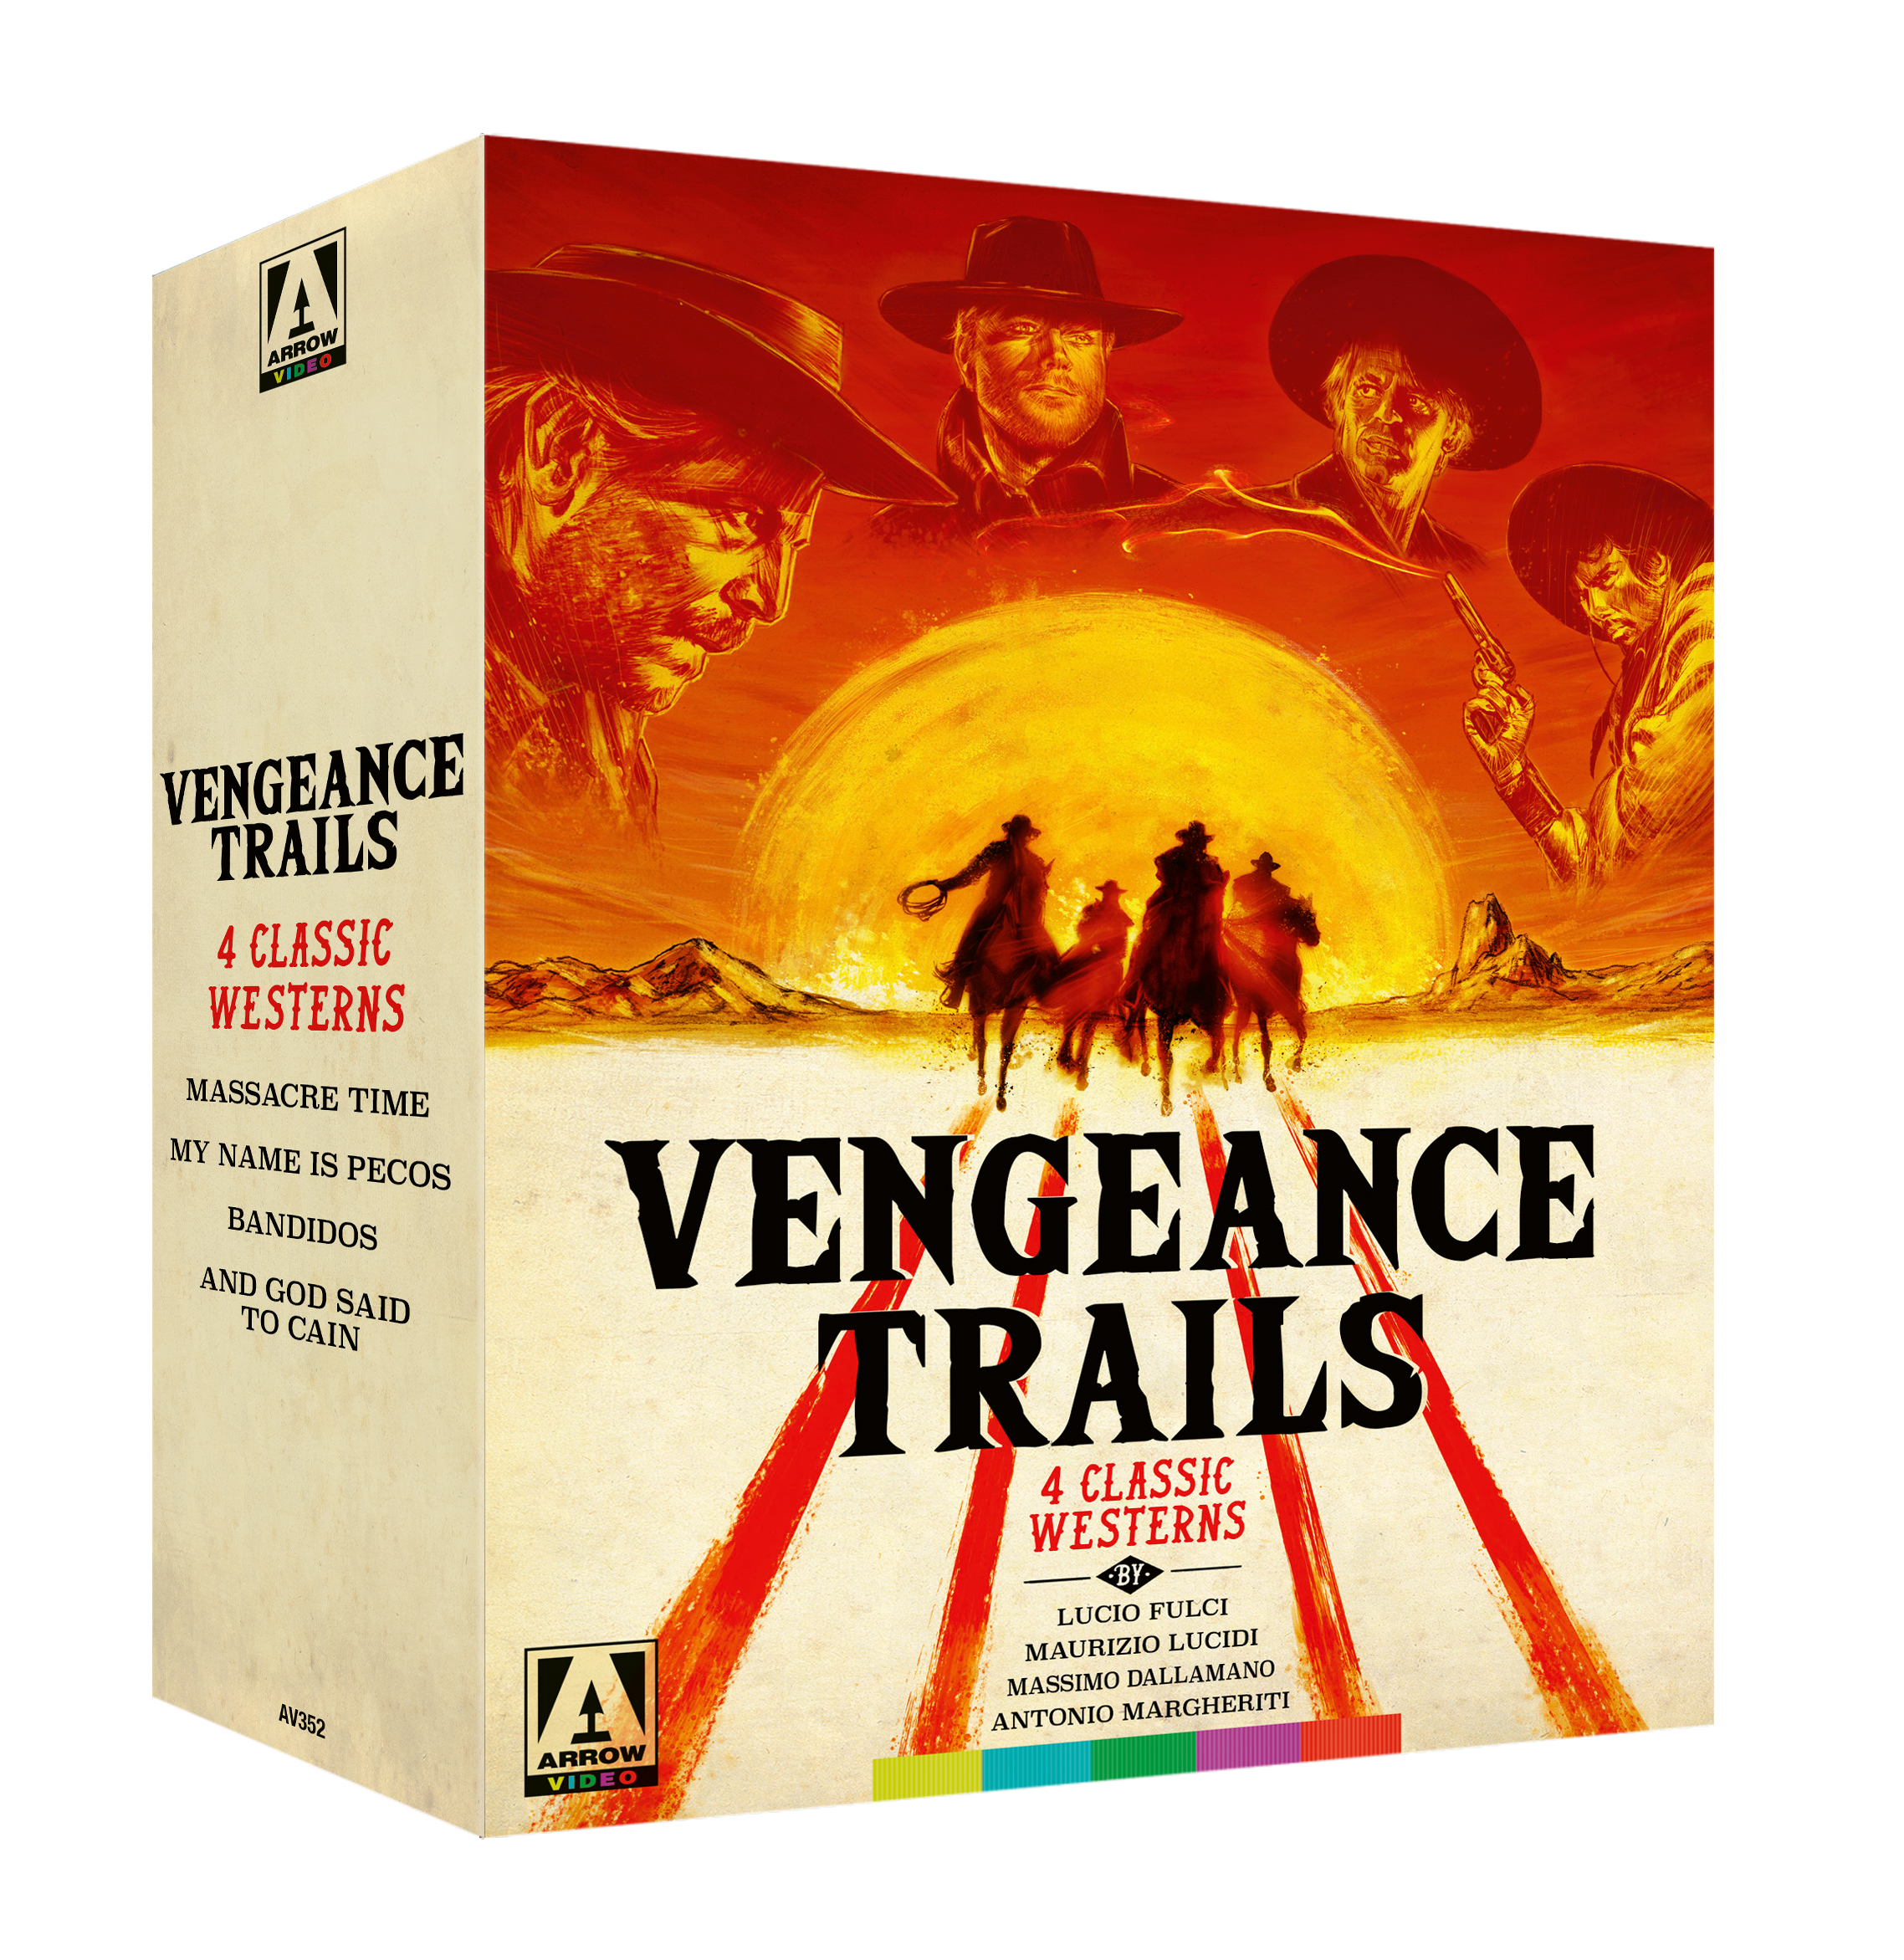 Vengeance Trails: Four Classic Westerns (Limited Edition) Blu-Ray Blu-Ray